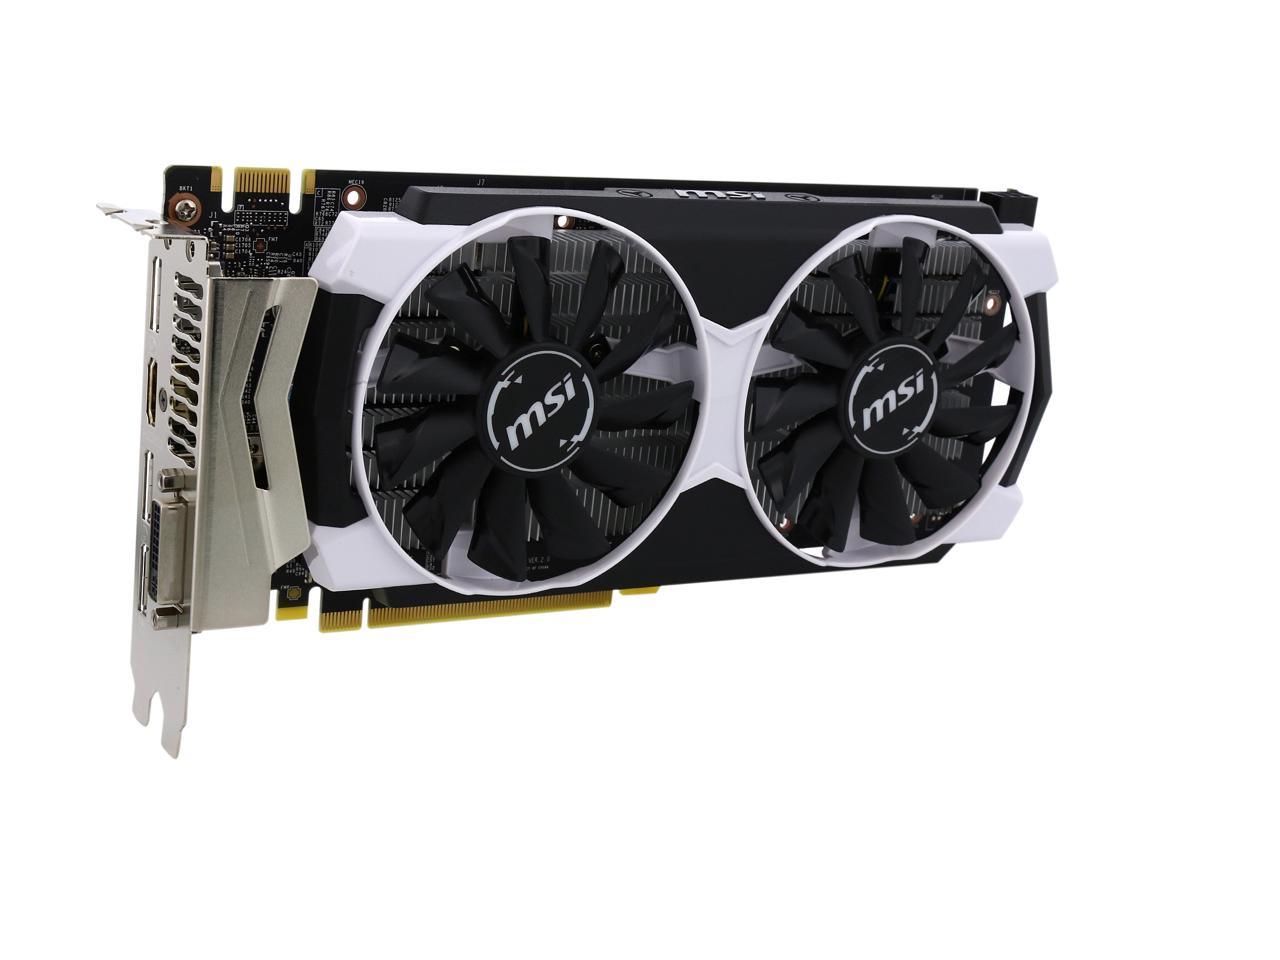 Msi gtx 950 csgo betting how to buy cryptocurrency under 18